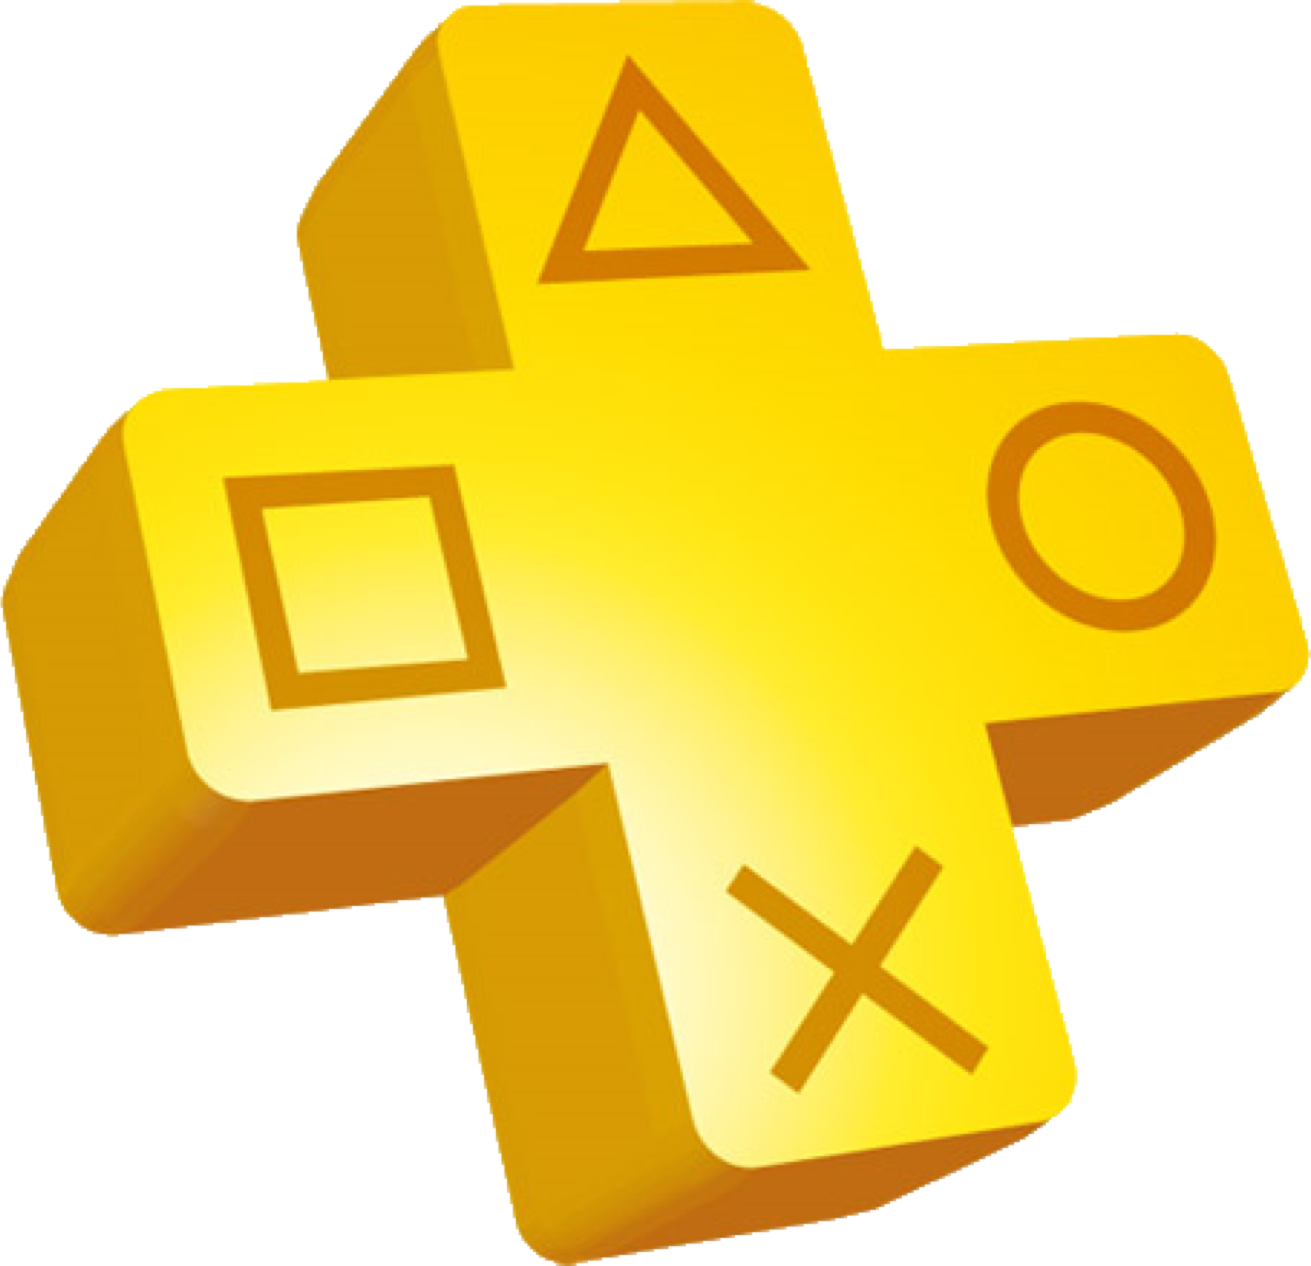 Ps4 June Refresh Playstation Plus Logo 01 Us - Ps Plus Icon Png (1311x1266)